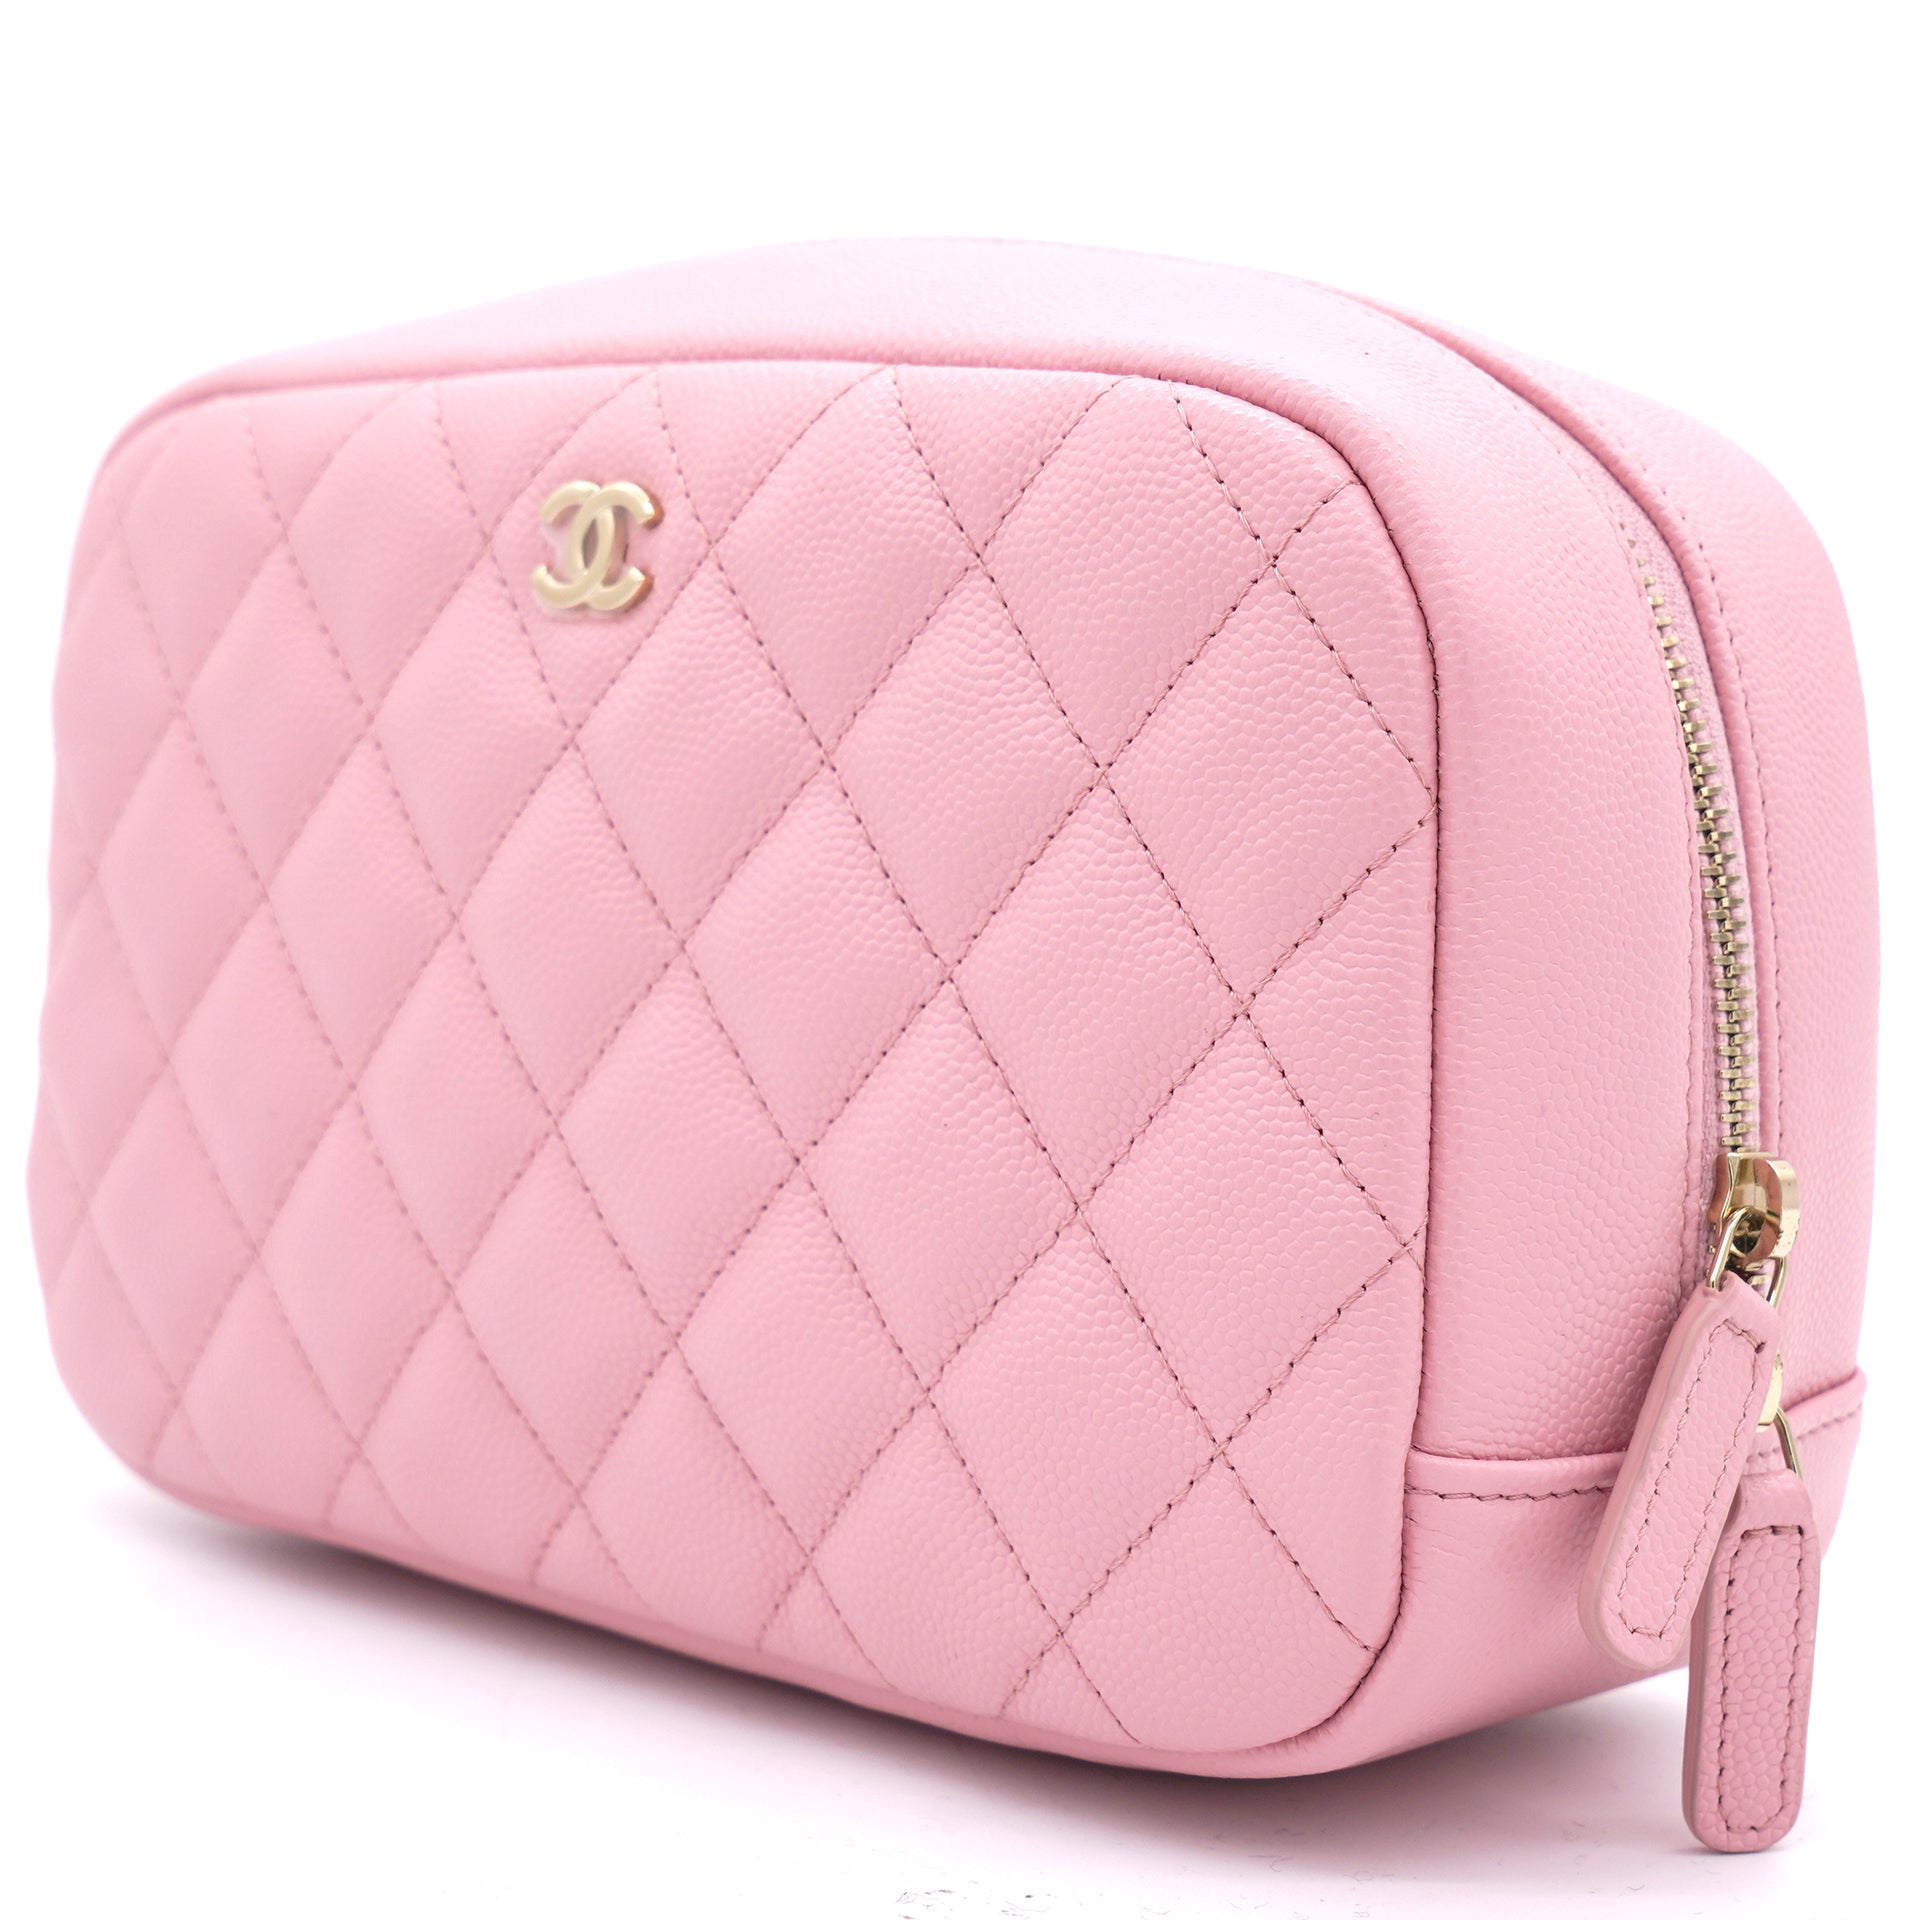 Chanel Caviar Quilted Medium Curvy Pouch Cosmetic Case Light Pink